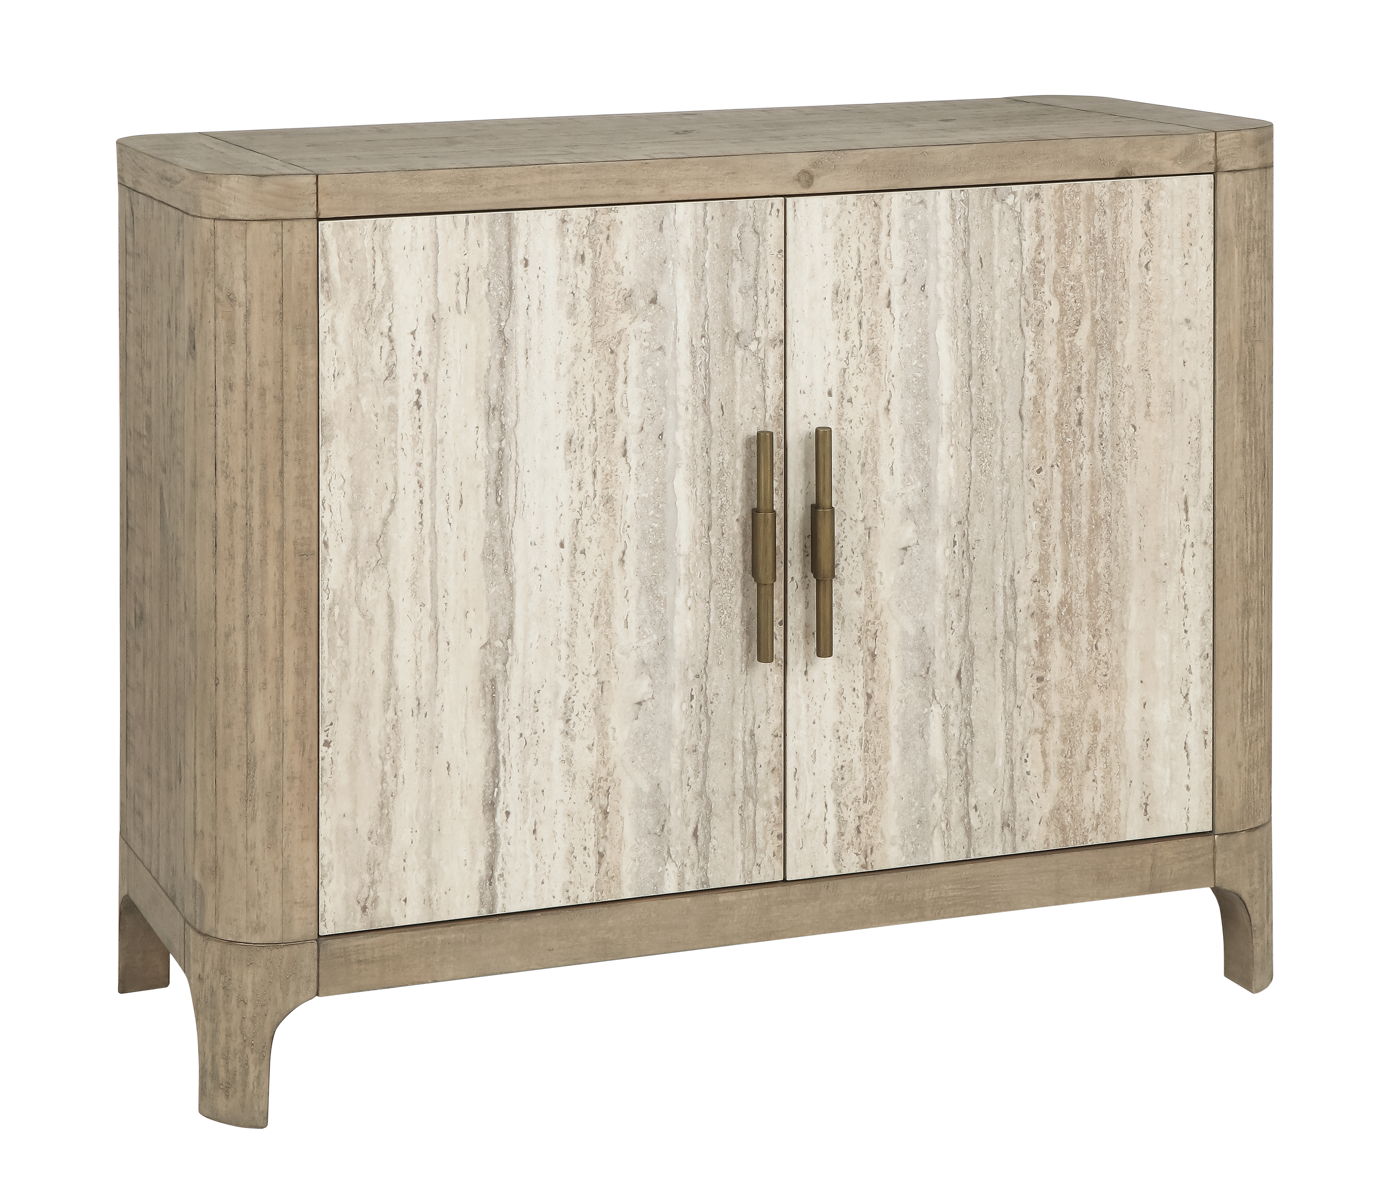 Alpine - Reclaimed Pine/Laminate 2 Door Cabinet - Washed Gray/Natural